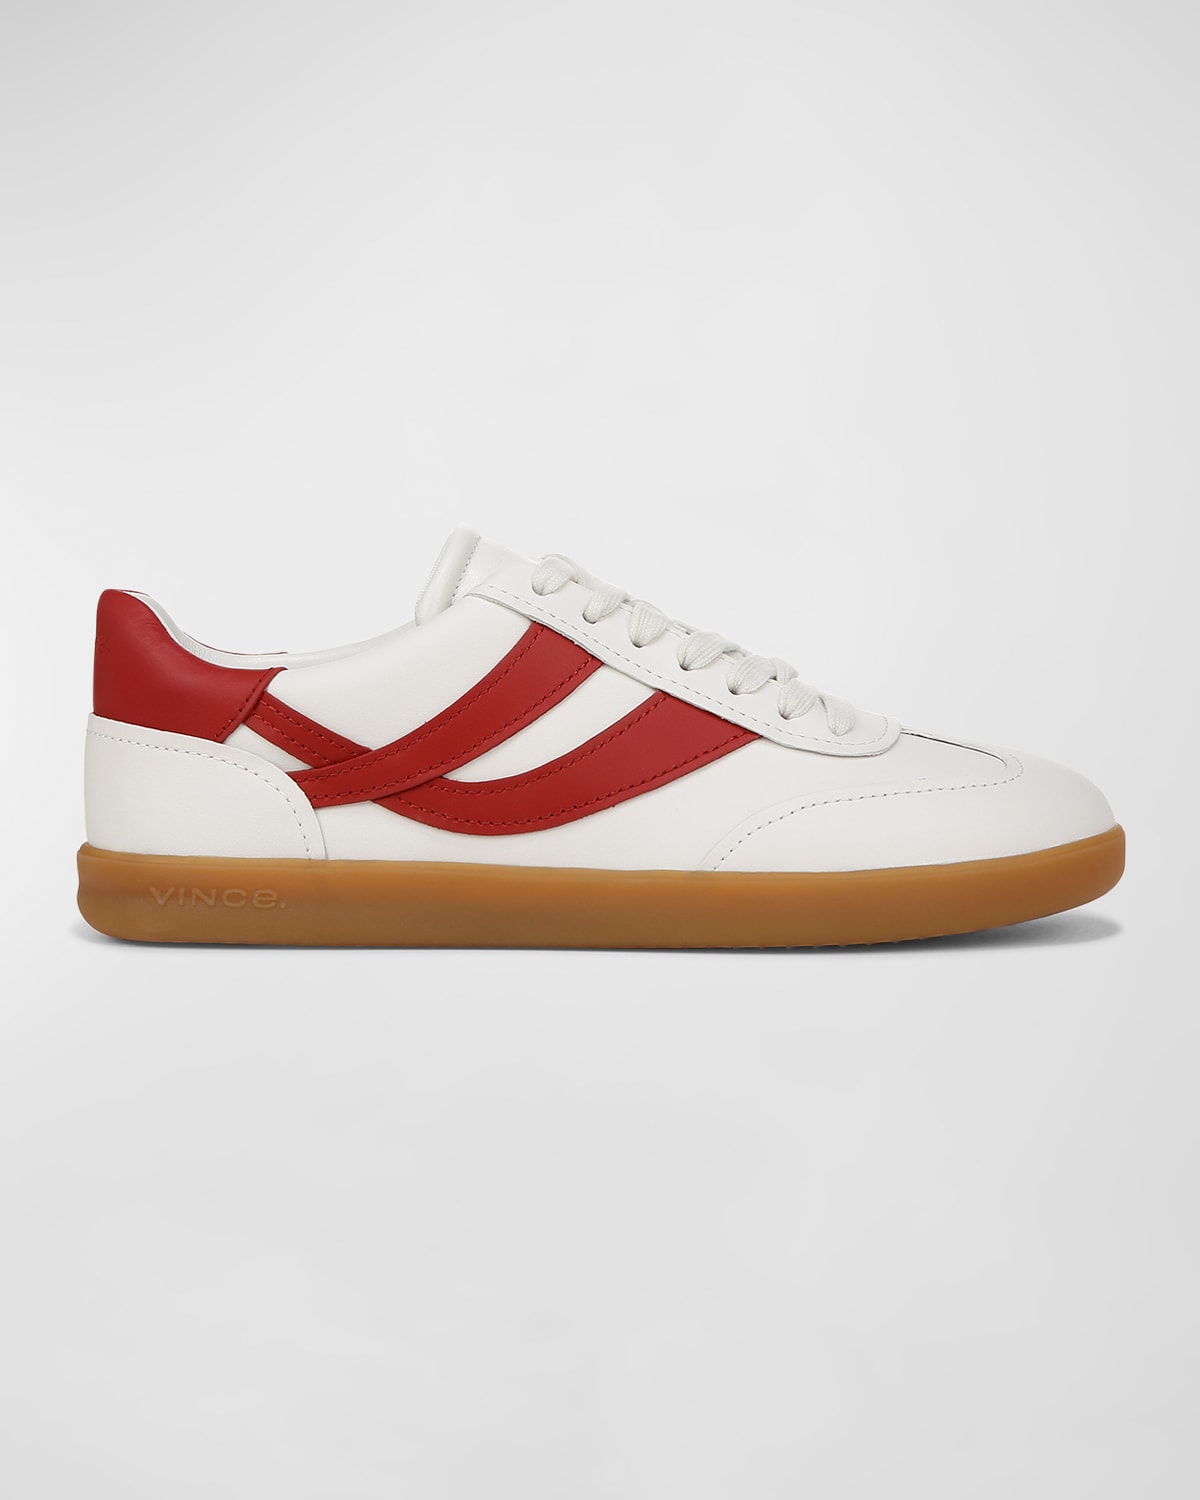 Men's Oasis-M Leather Low-Top Sneakers